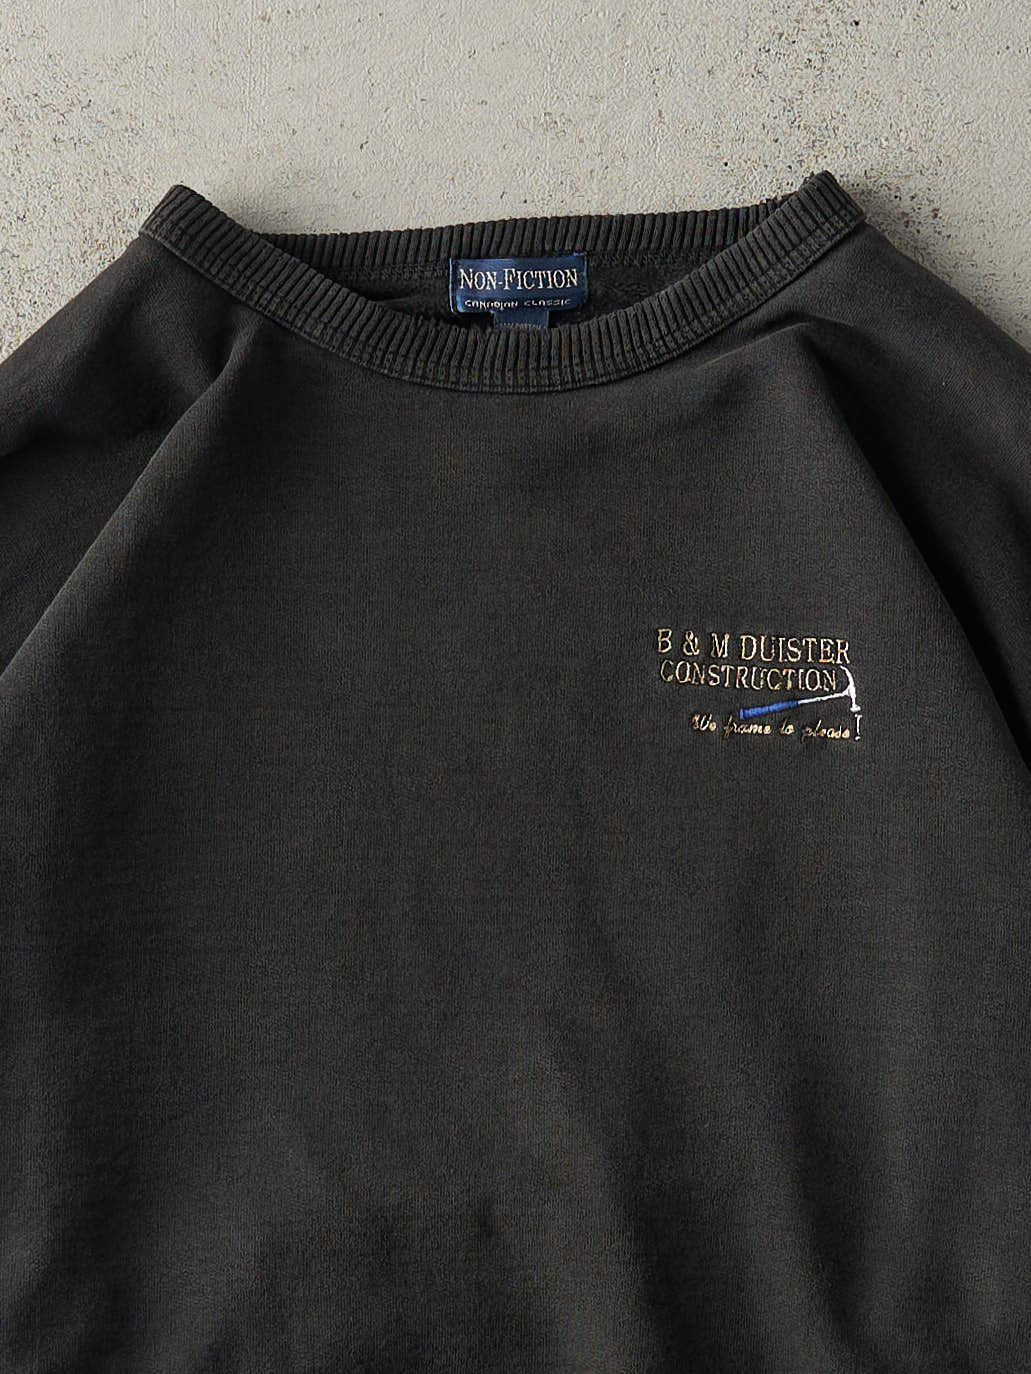 Vintage 90s Faded Black Embroidered B&M Construction Crewneck (XL)